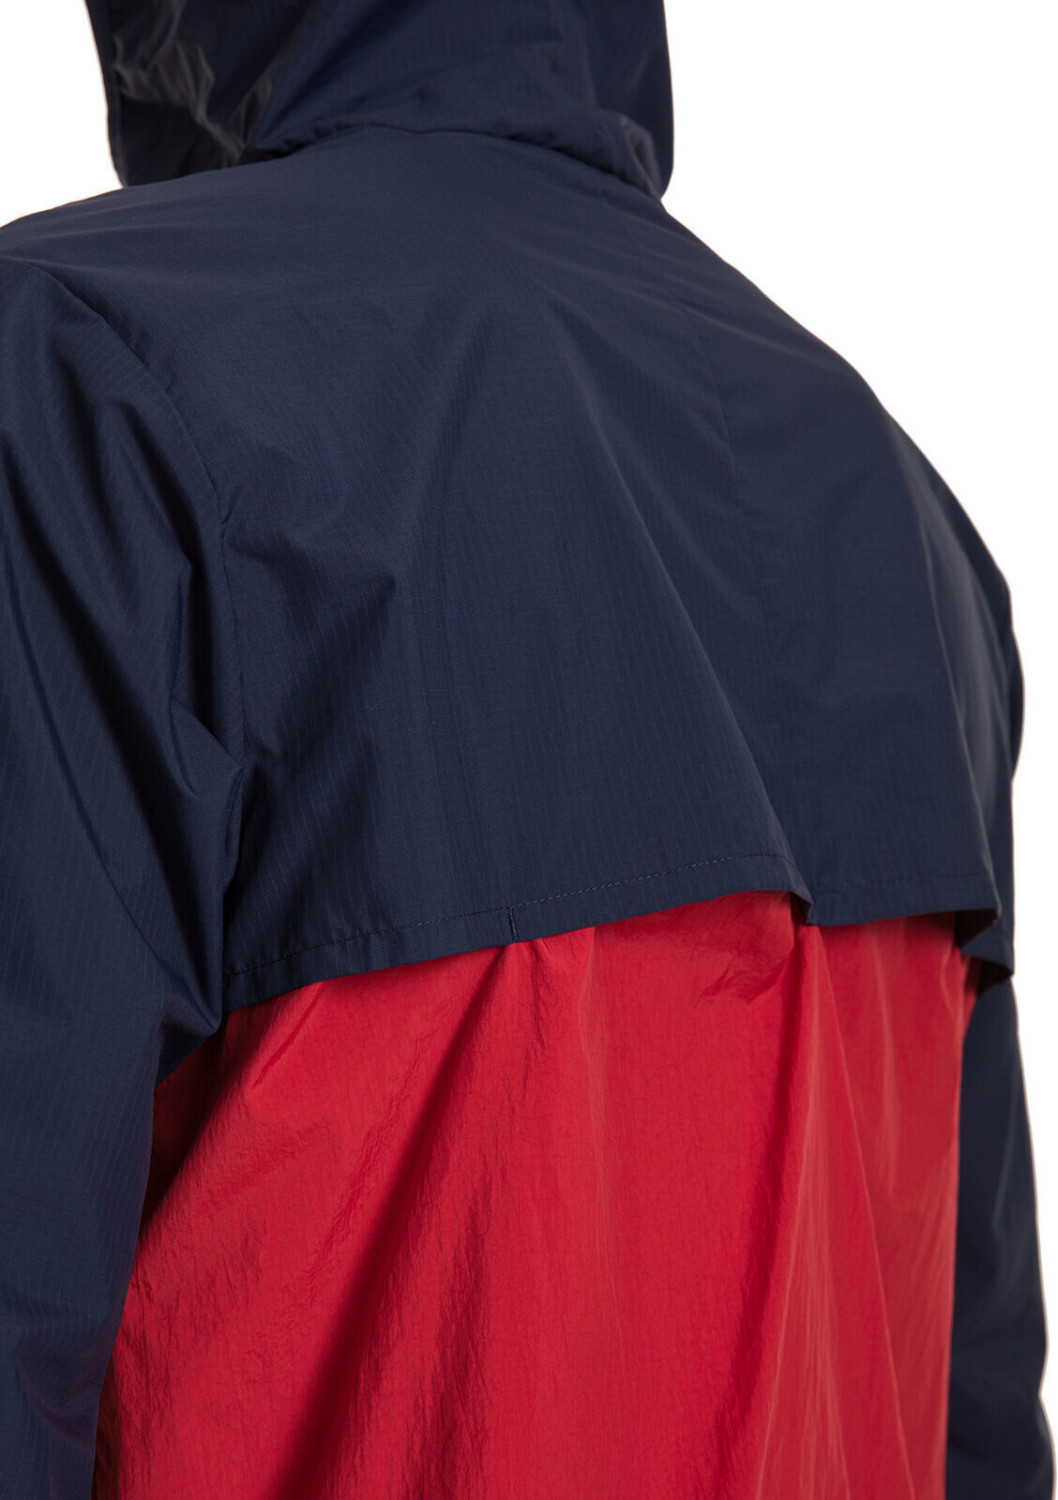 Buy Berghaus Men's Corbeck Wind Smock navy/red from £45.00 (Today ...